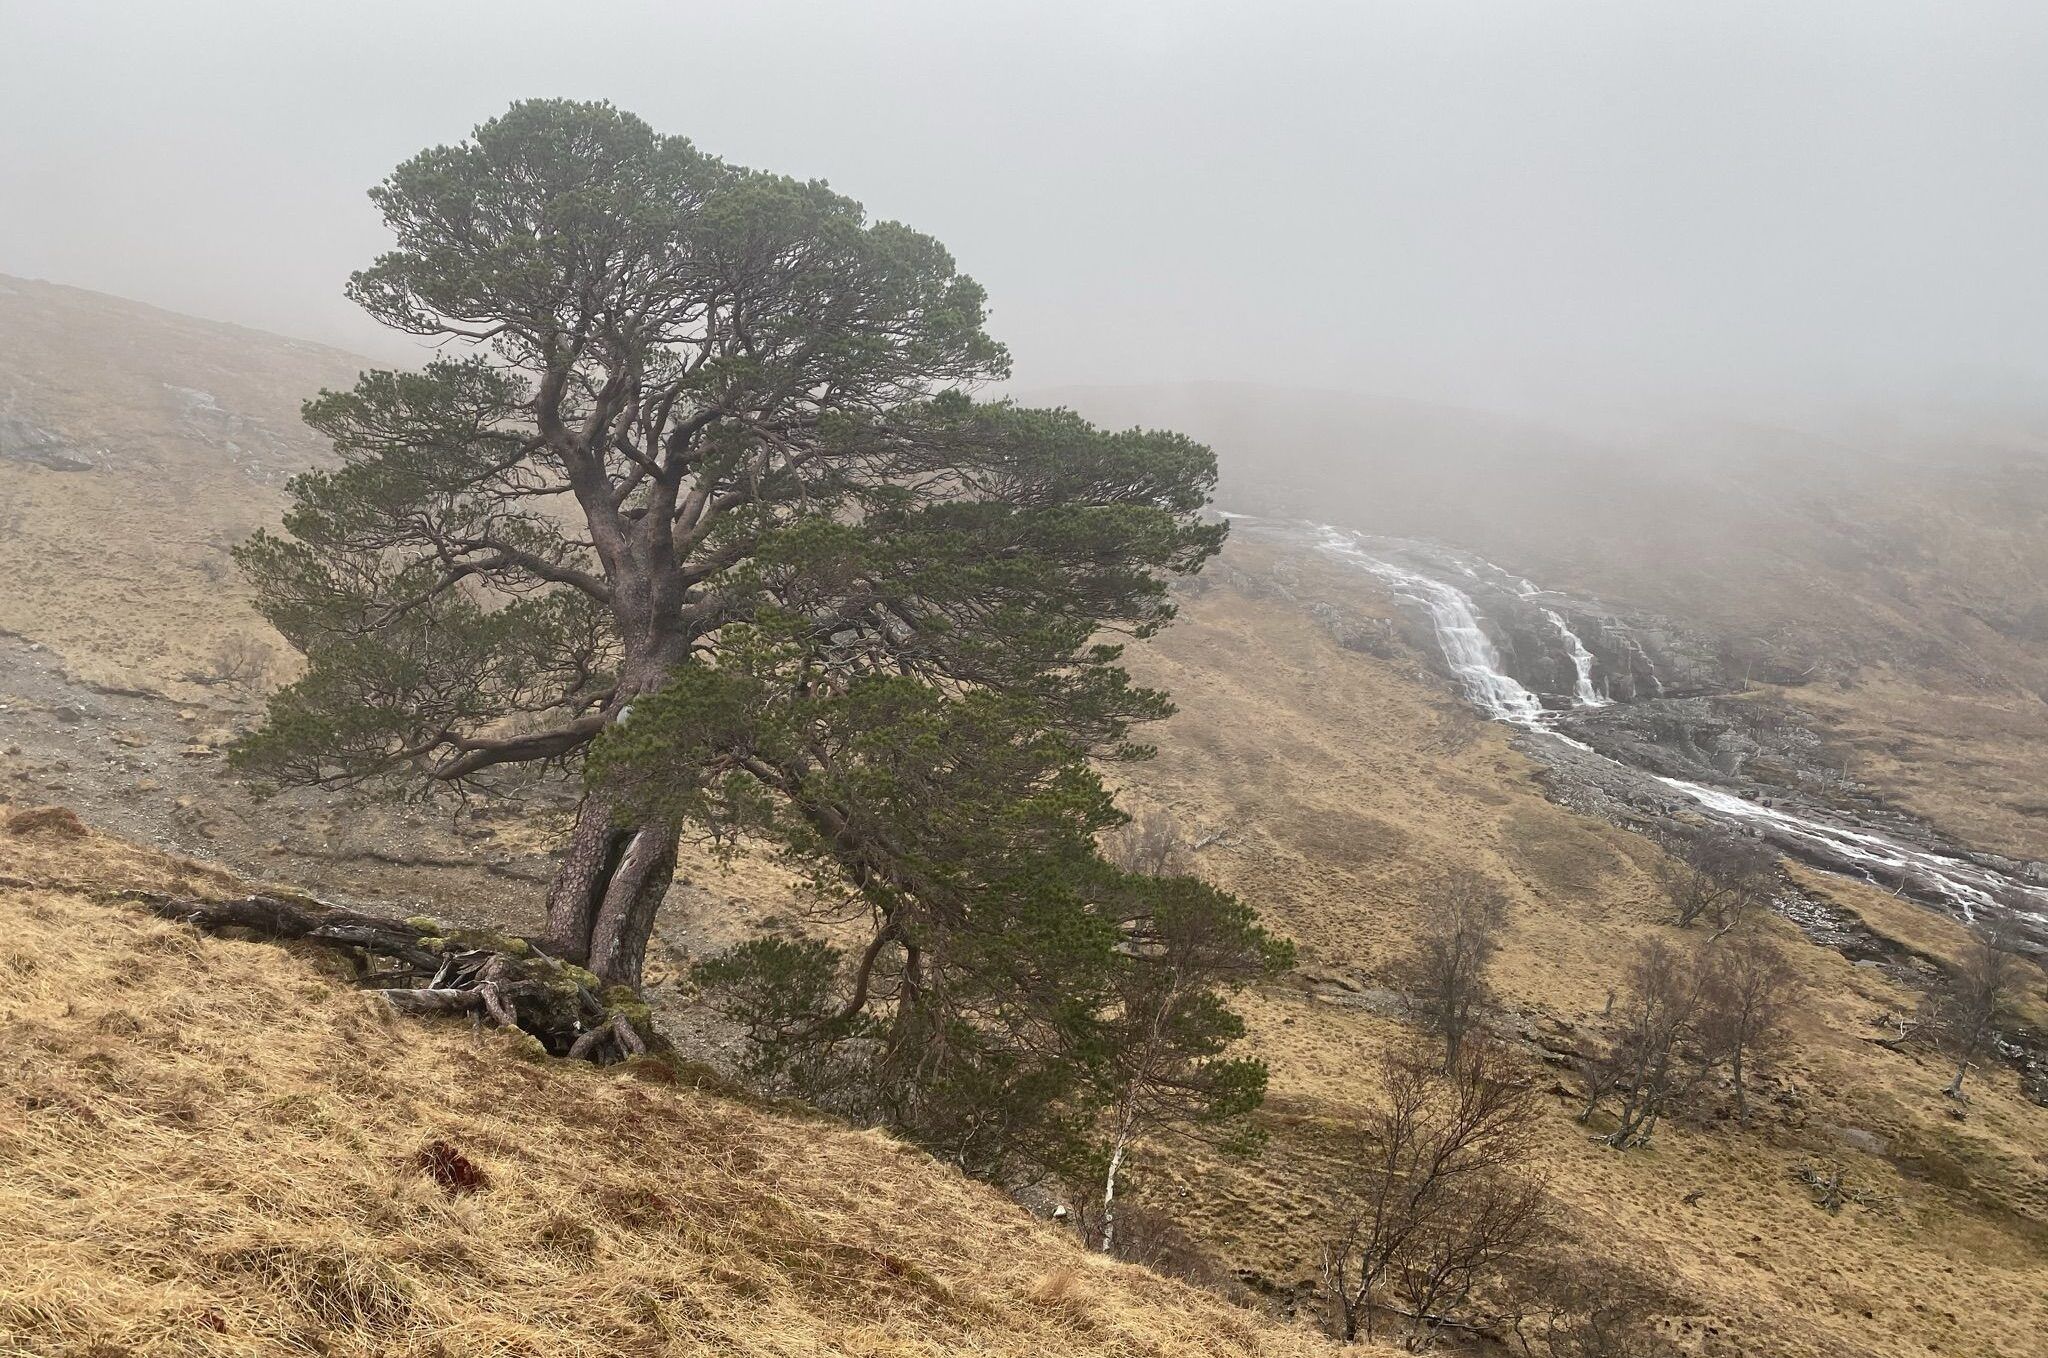 lone-wild-Scots-pine-clinging-on-in-a-chronically-overbrowsed-landscape-aspect-ratio-540-358